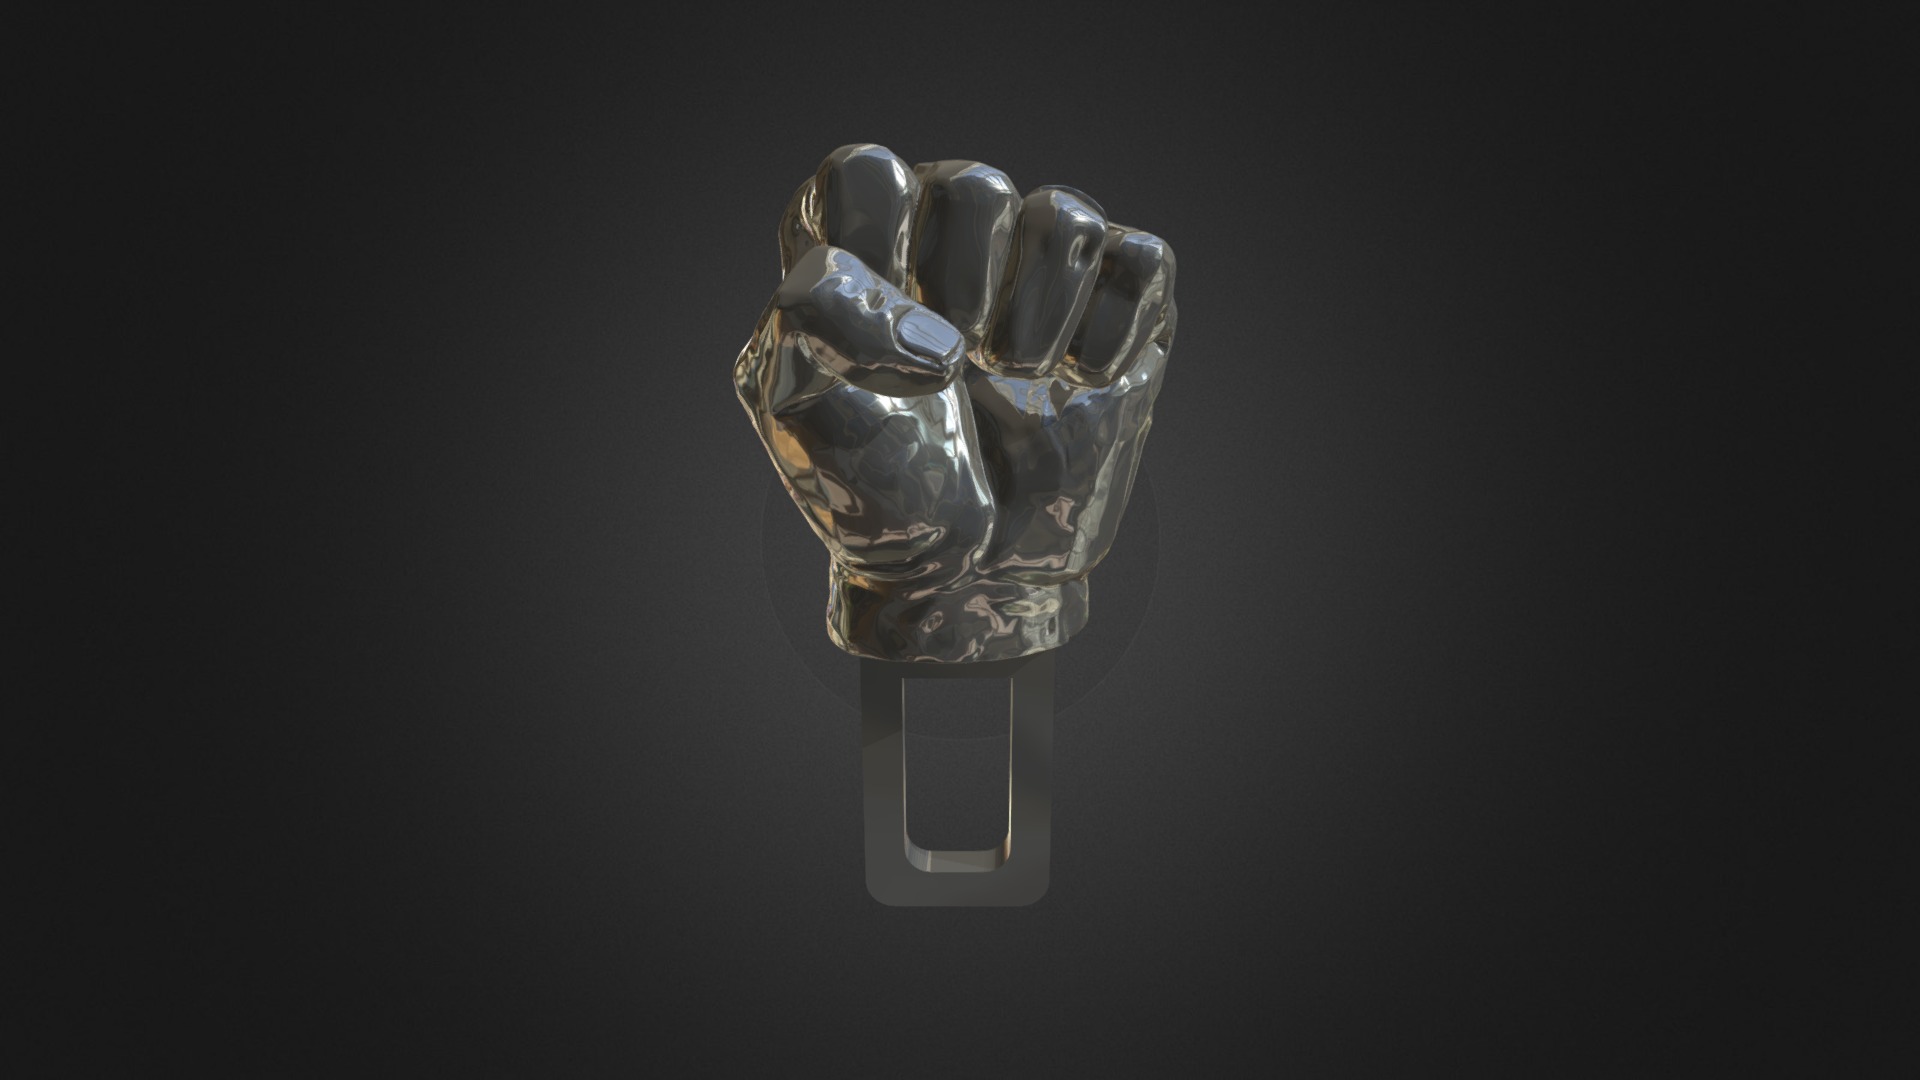 3D model Fist ZIPPER-V2 - This is a 3D model of the Fist ZIPPER-V2. The 3D model is about a diamond ring on a black background.